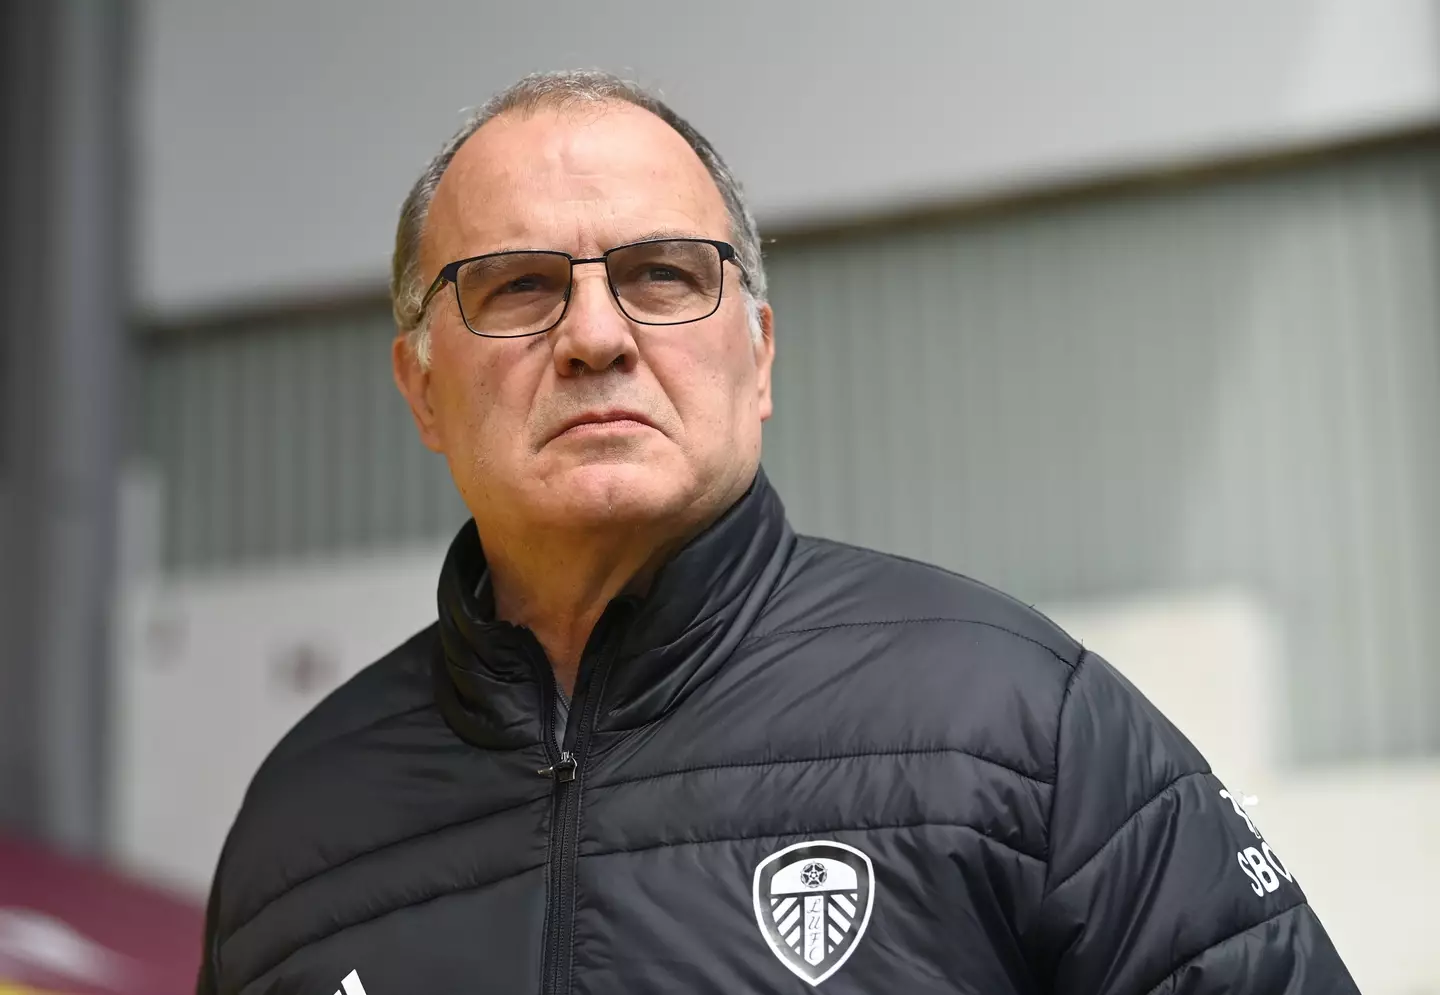 Marcelo Bielsa has turned down the opportunity to become Everton manager. (Image